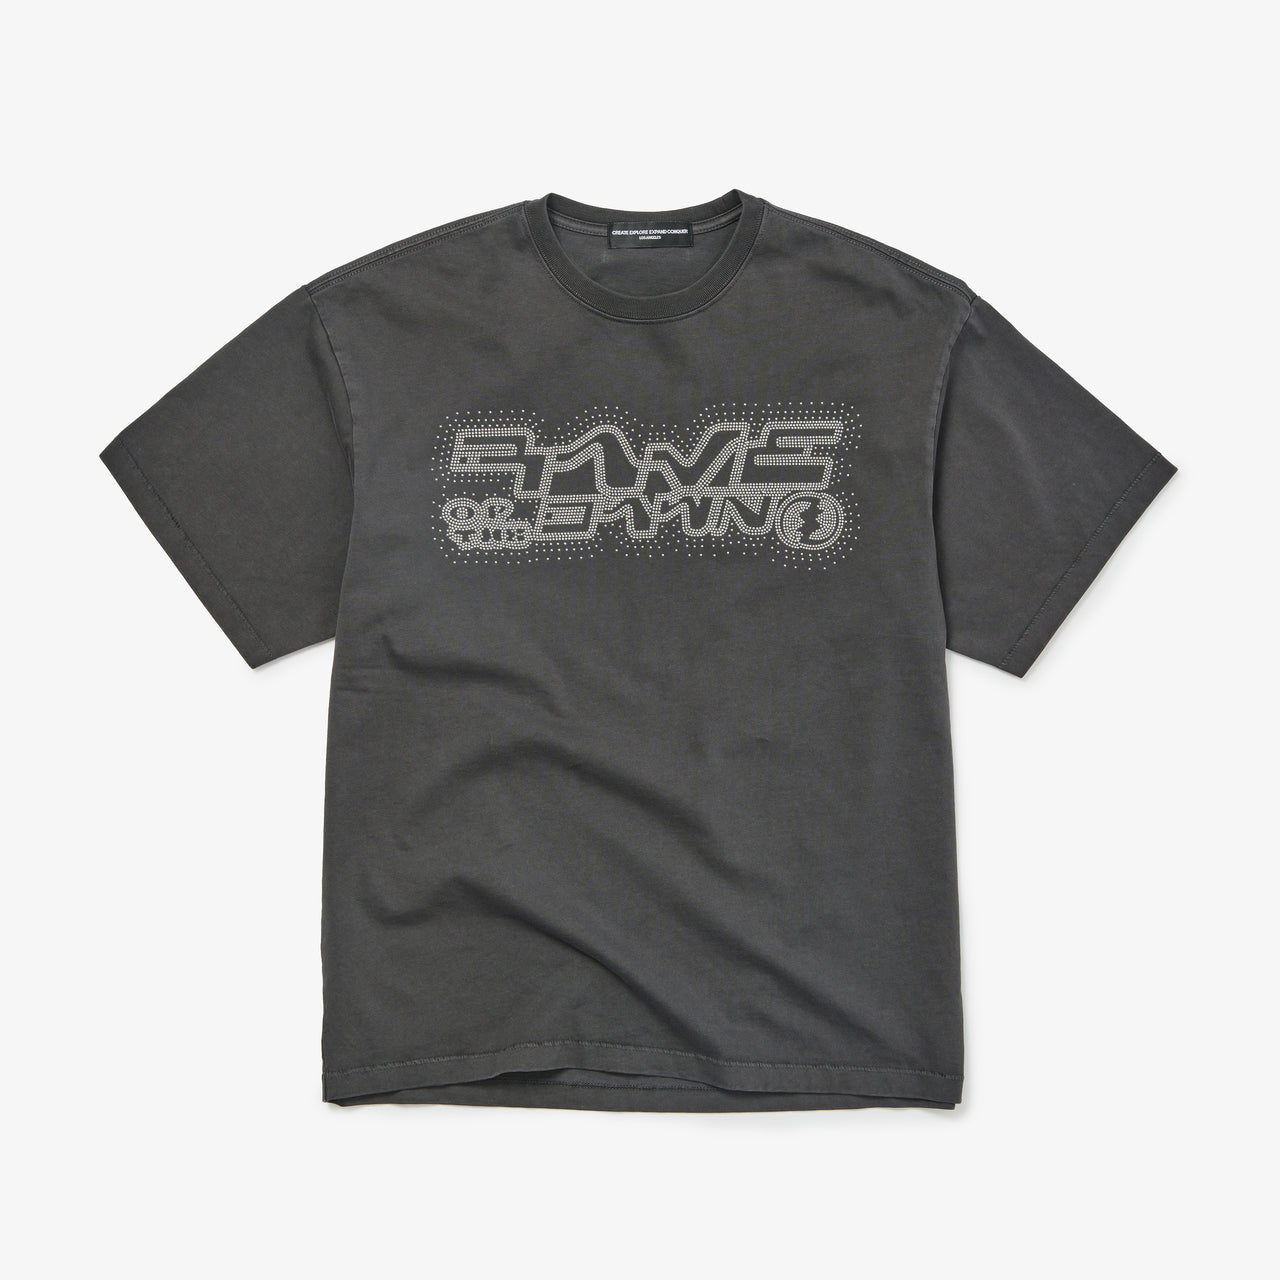 Rave Of the Dawn Slogan T-Shirt in Vintage Black